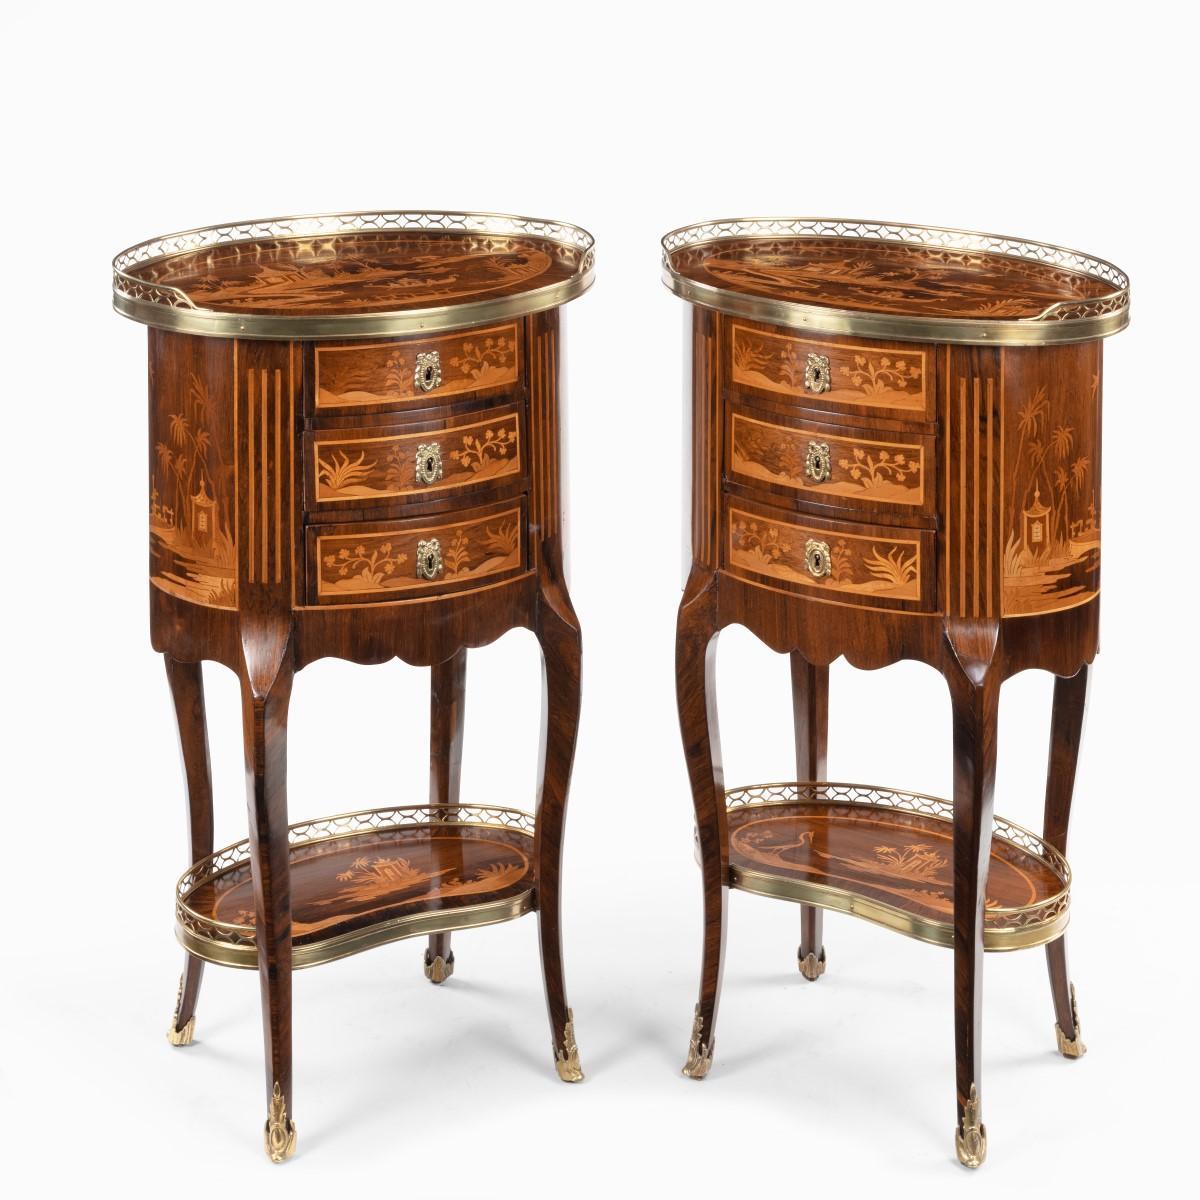 A pair of French rosewood occasional tables, each of oval form with three small drawers set upon cabriole legs joined by a kidney-shaped shelf, decorated in boxwood and kingwood marquetry with oriental landscapes showing a courtly boat on a lake